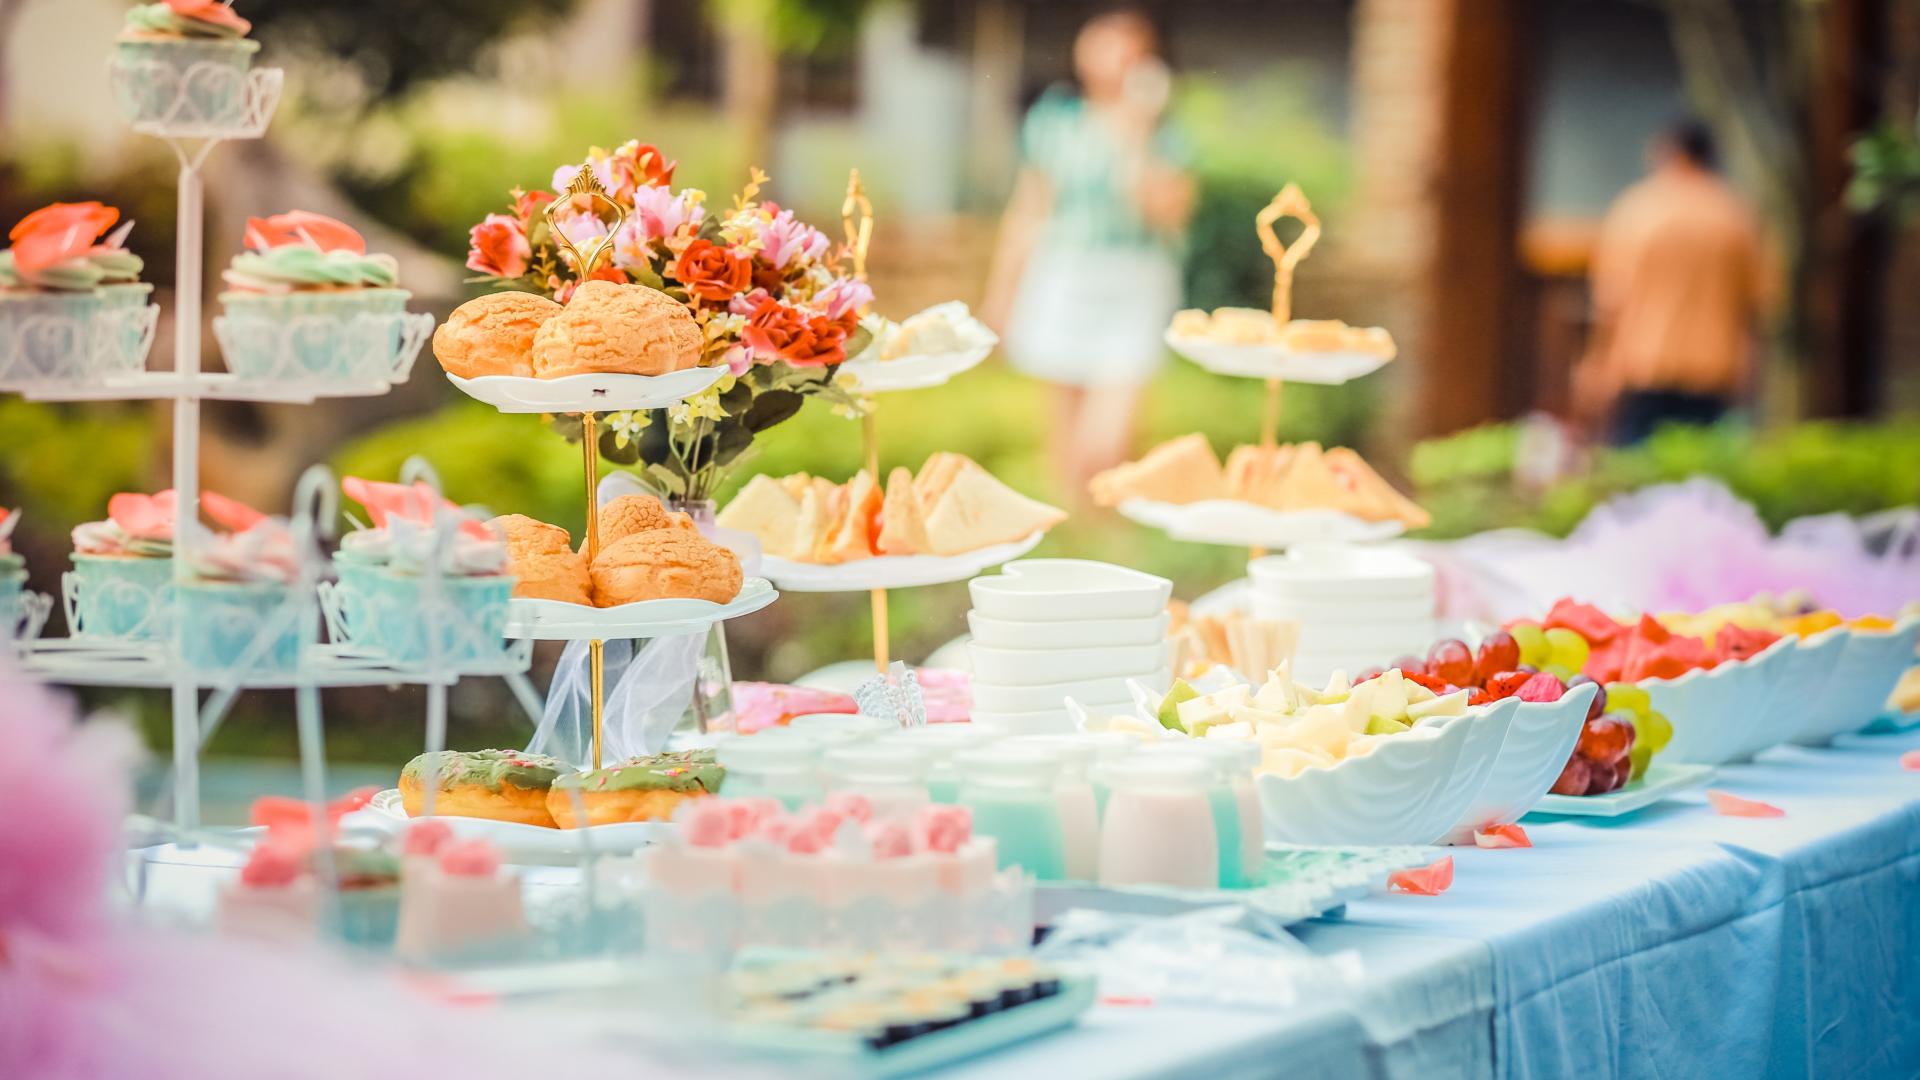 Baby Shower Venues for Hire in Manchester